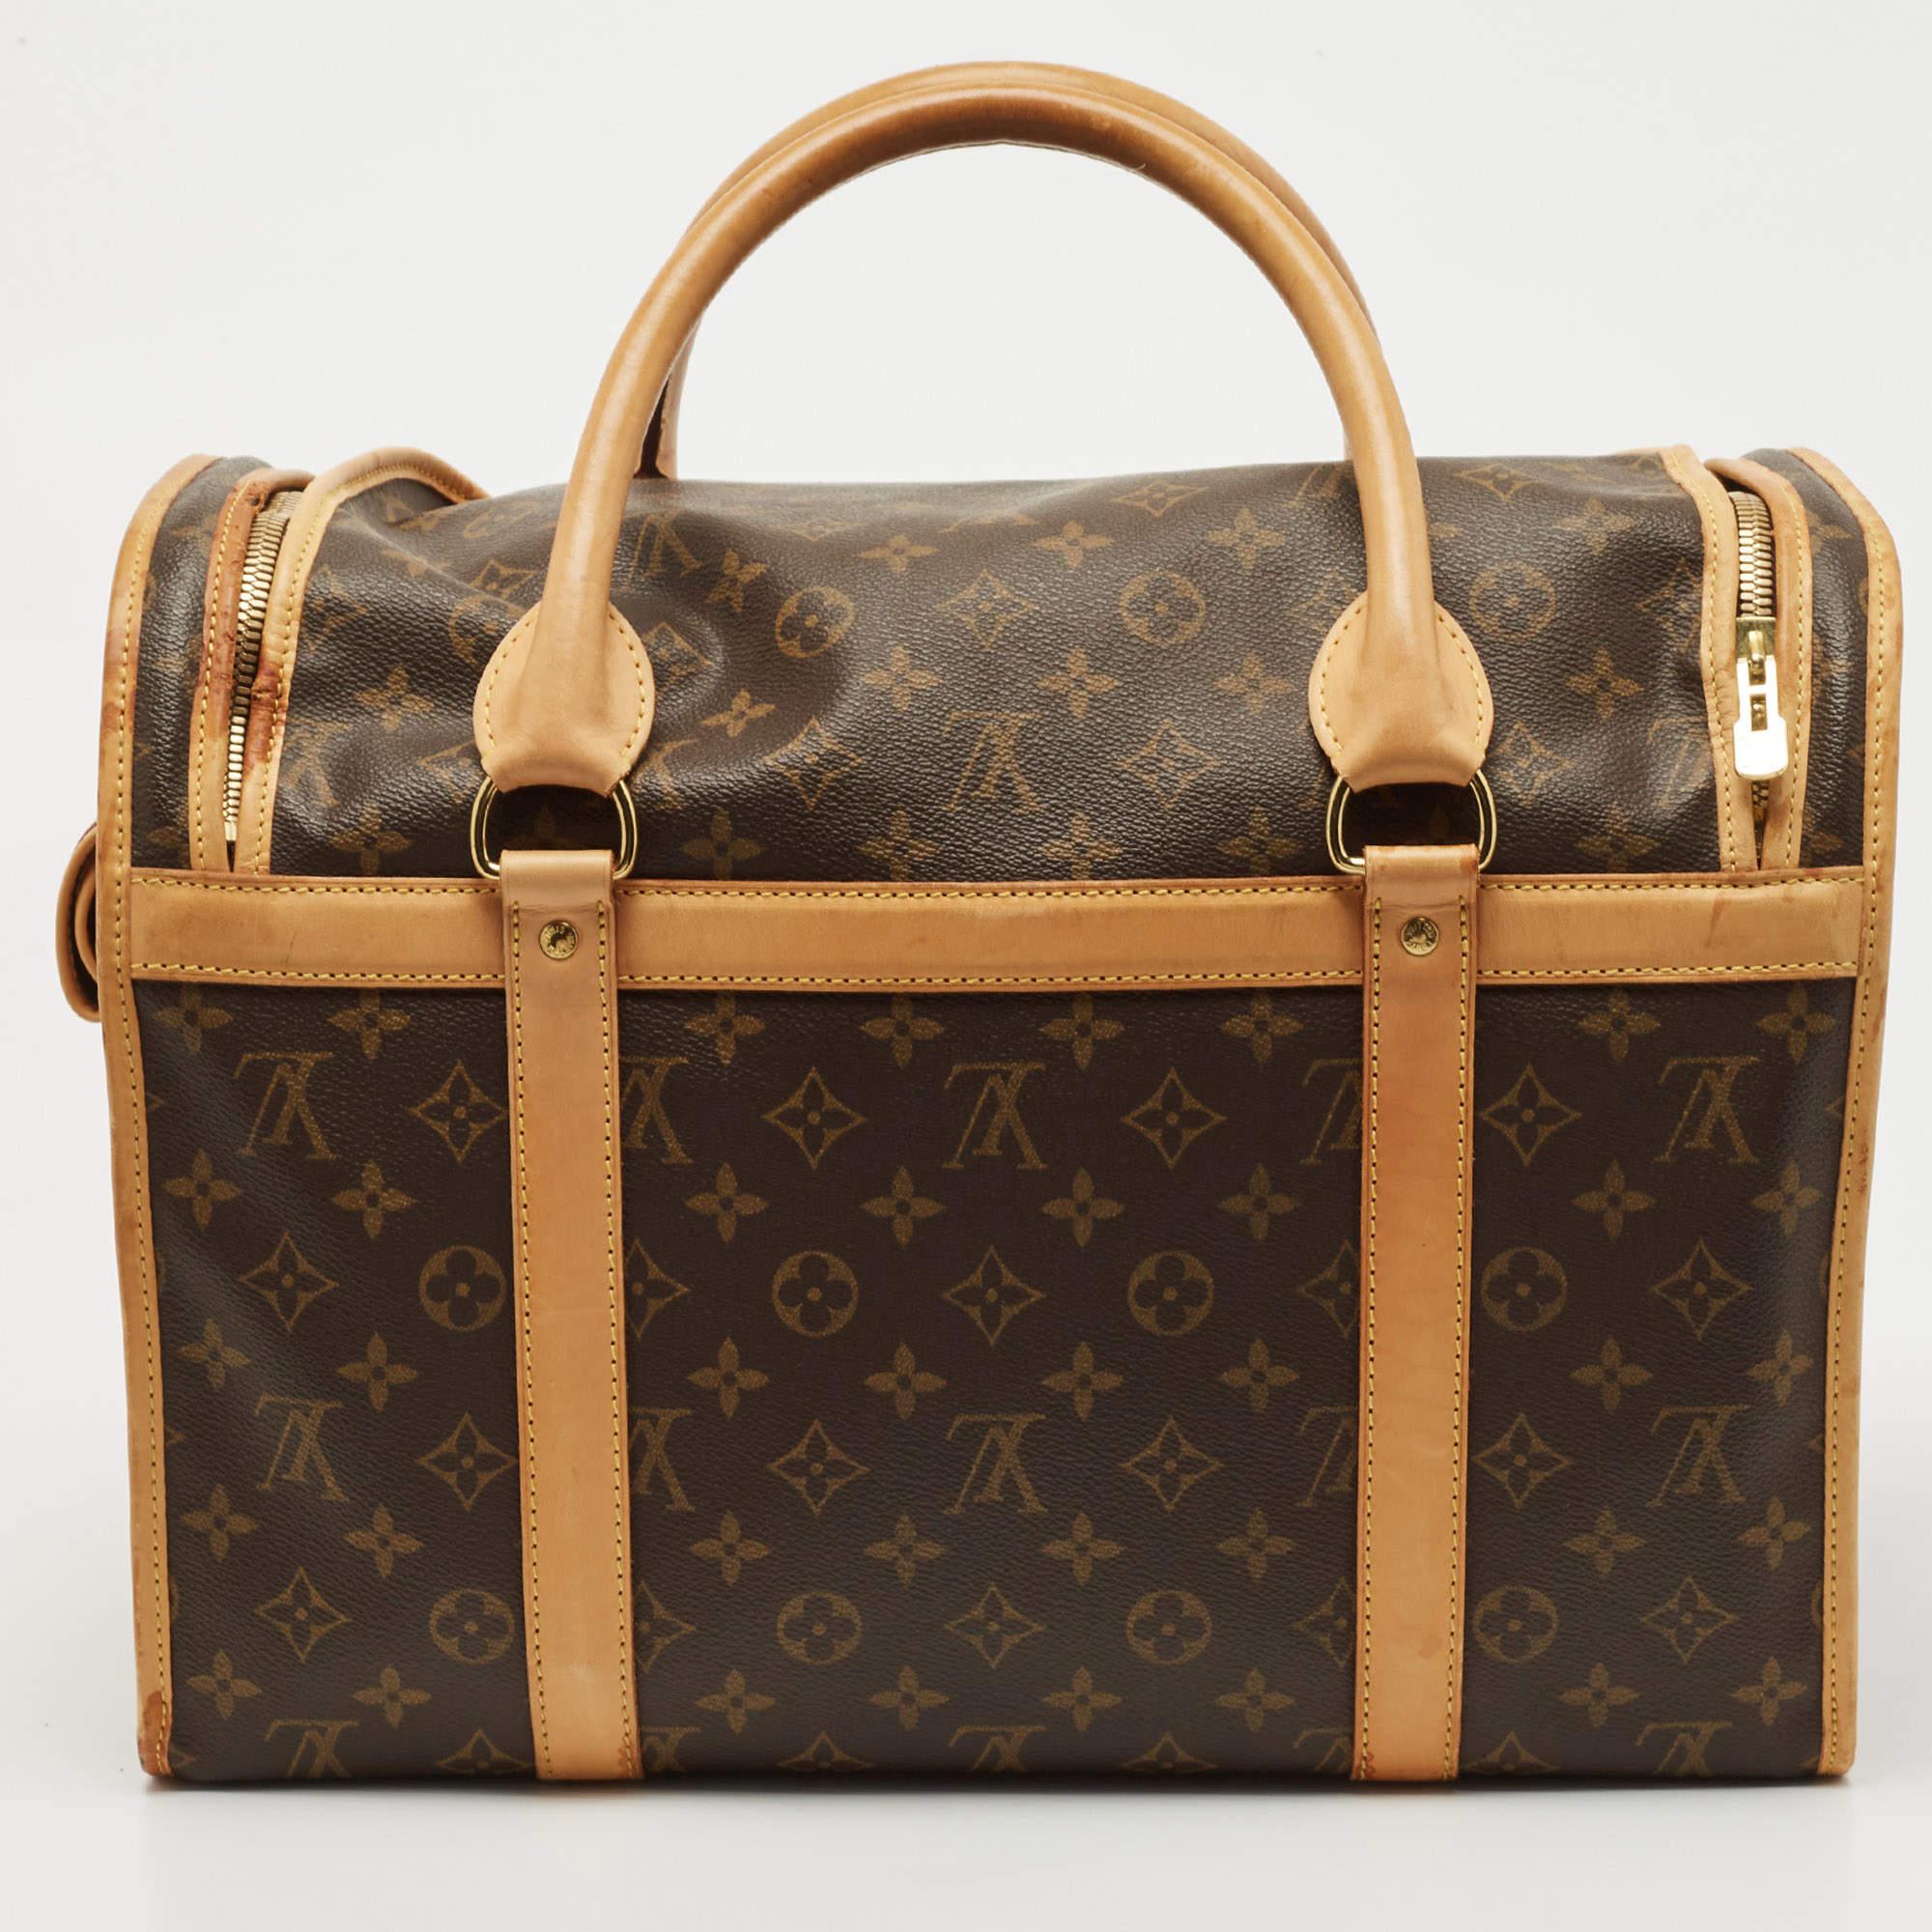 Everything falls short when we are talking about dogs and the love dog lovers bear for them. To extend this profound companionship all day long, Louis Vuitton brings you this ultra-chic and functional Sac Chien 40 Dog Carrier bag. It's a lovely